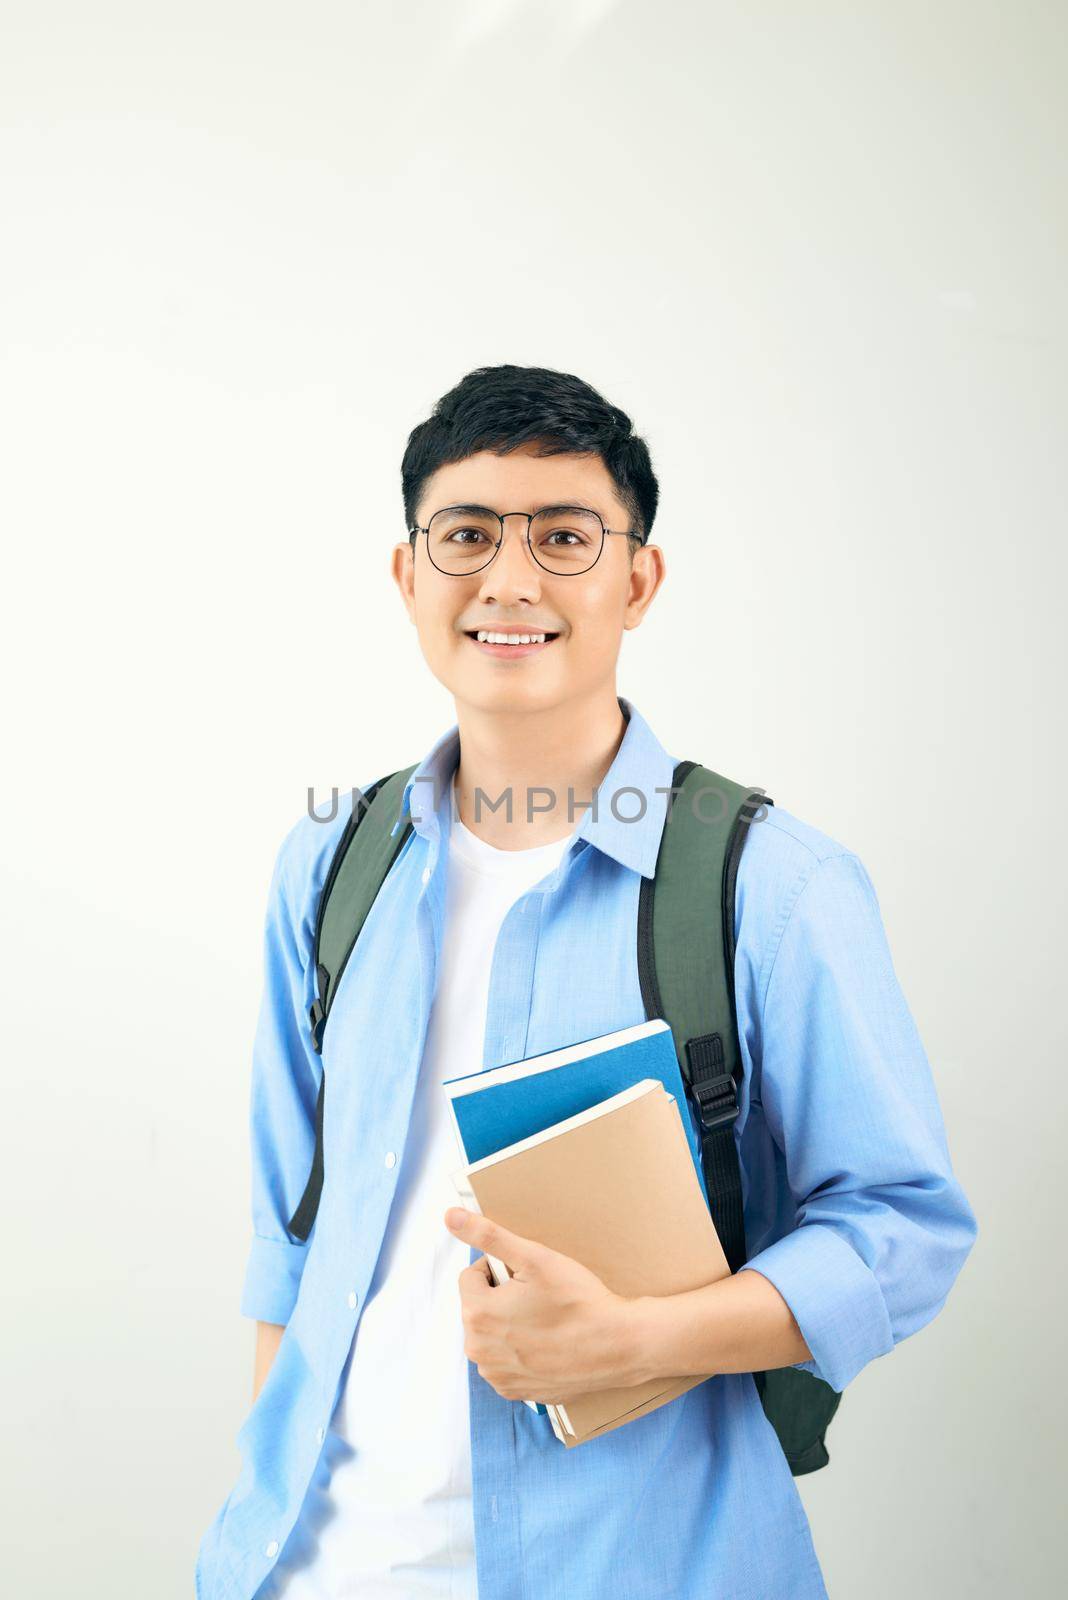 Handsome young student smiling and holding a notebook, isolated on white background